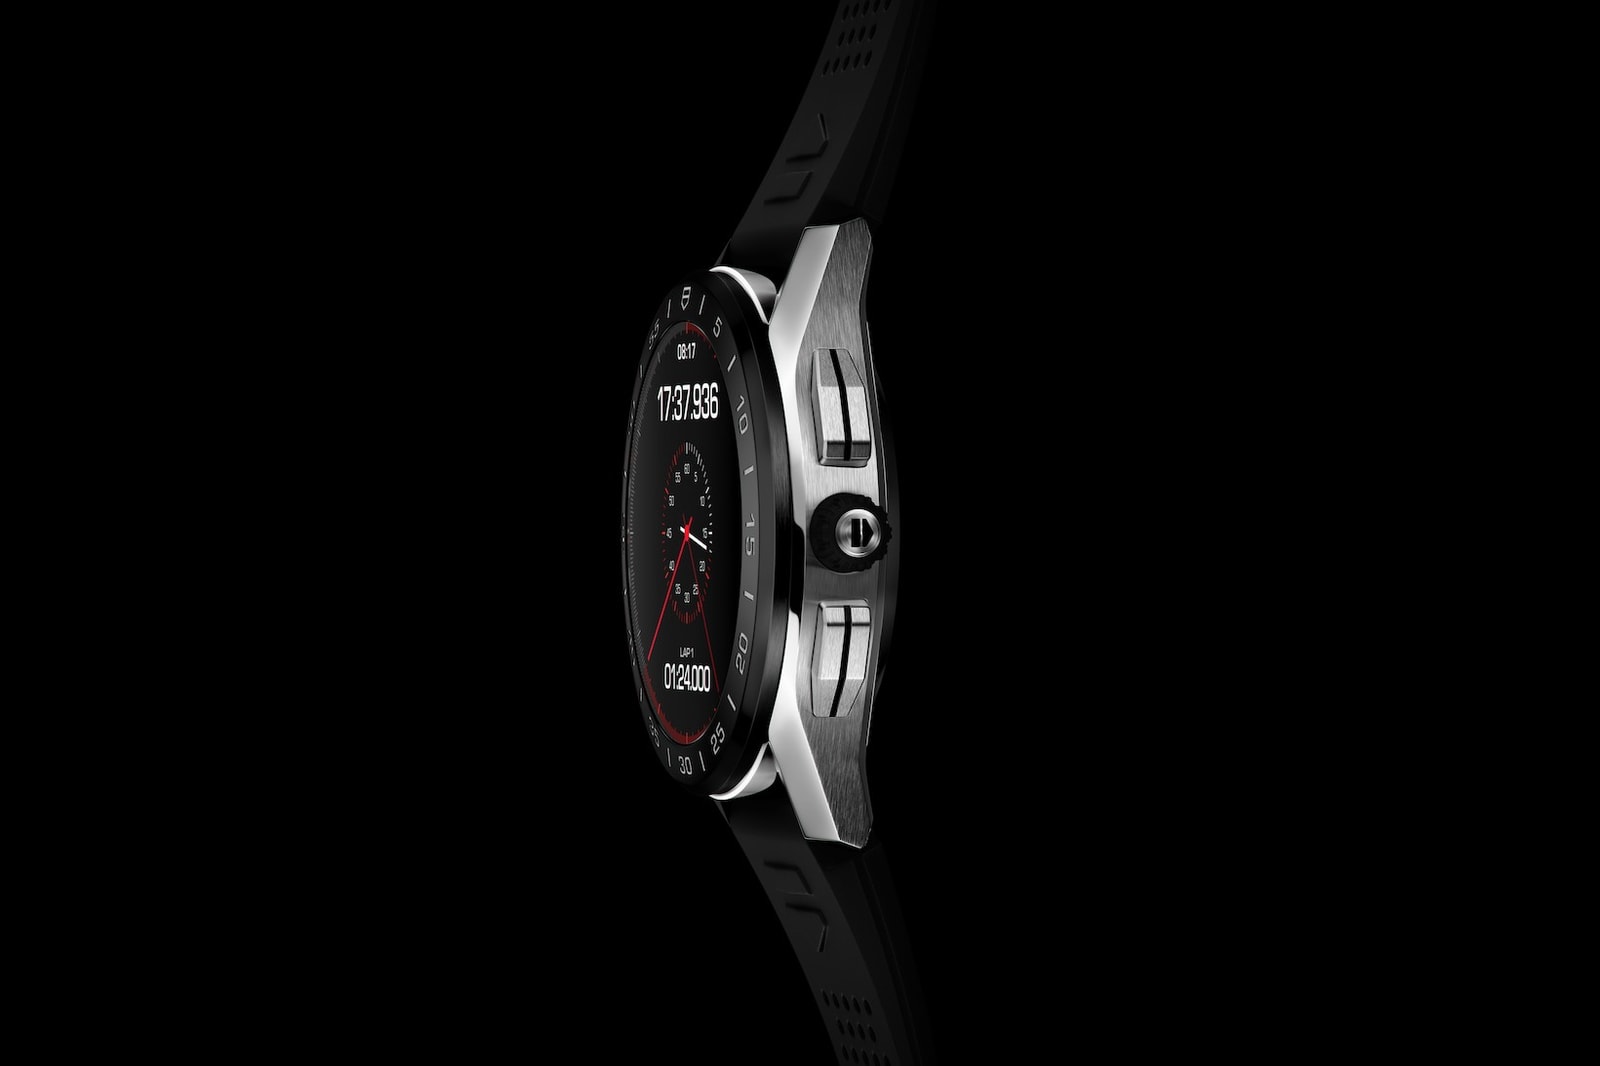 tag heuer new generation connected timepiece watch range sports performance technical physical digital sports